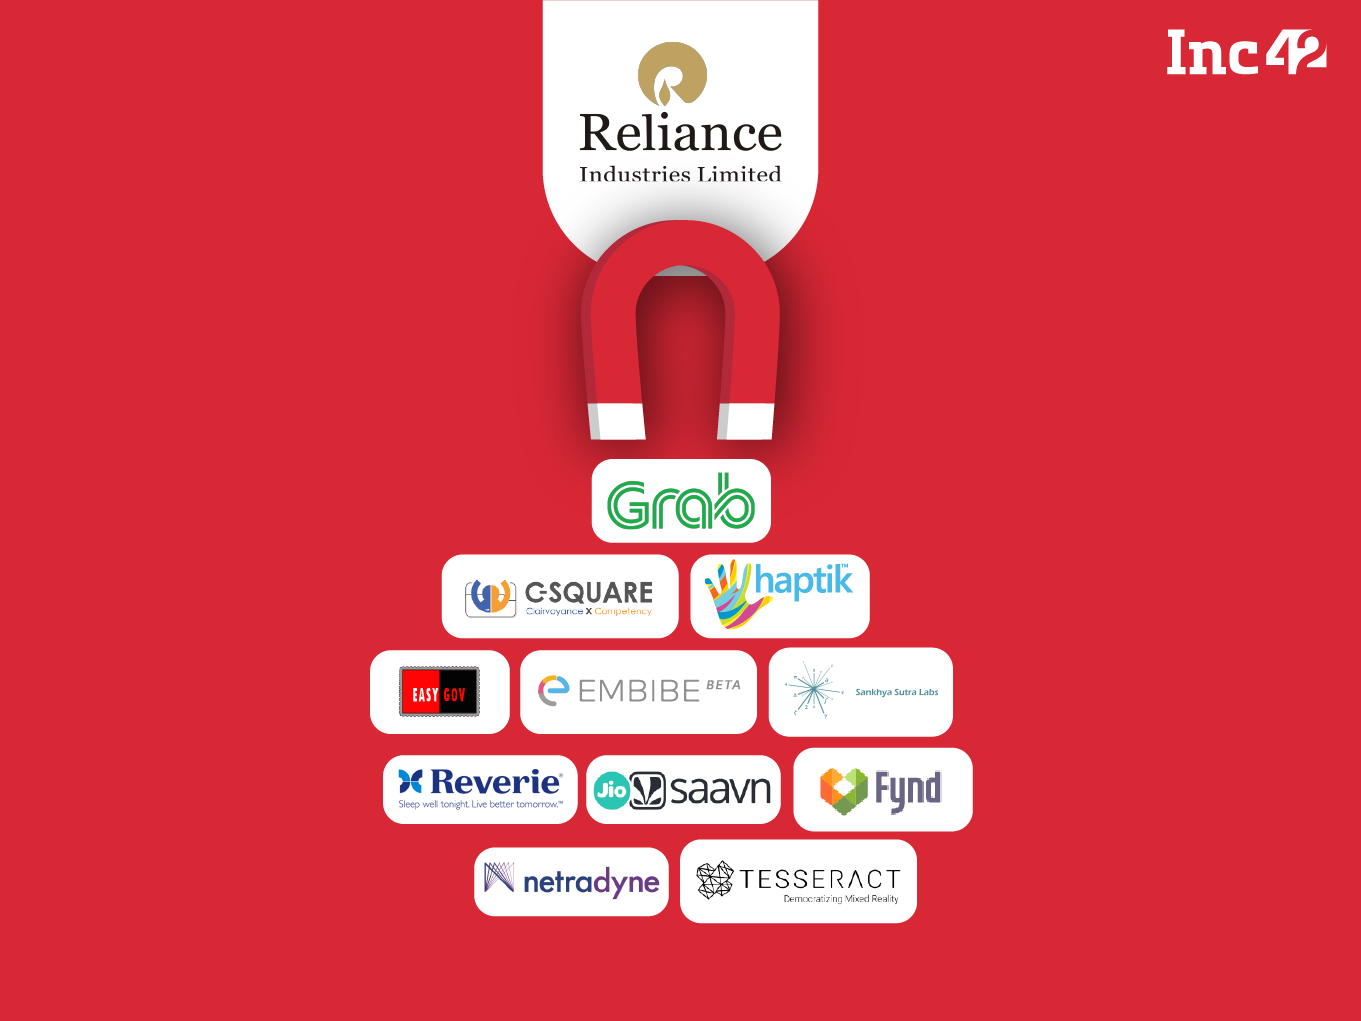 11 Indian Tech Startup Acquisitions And Investments By Reliance In 2018-19